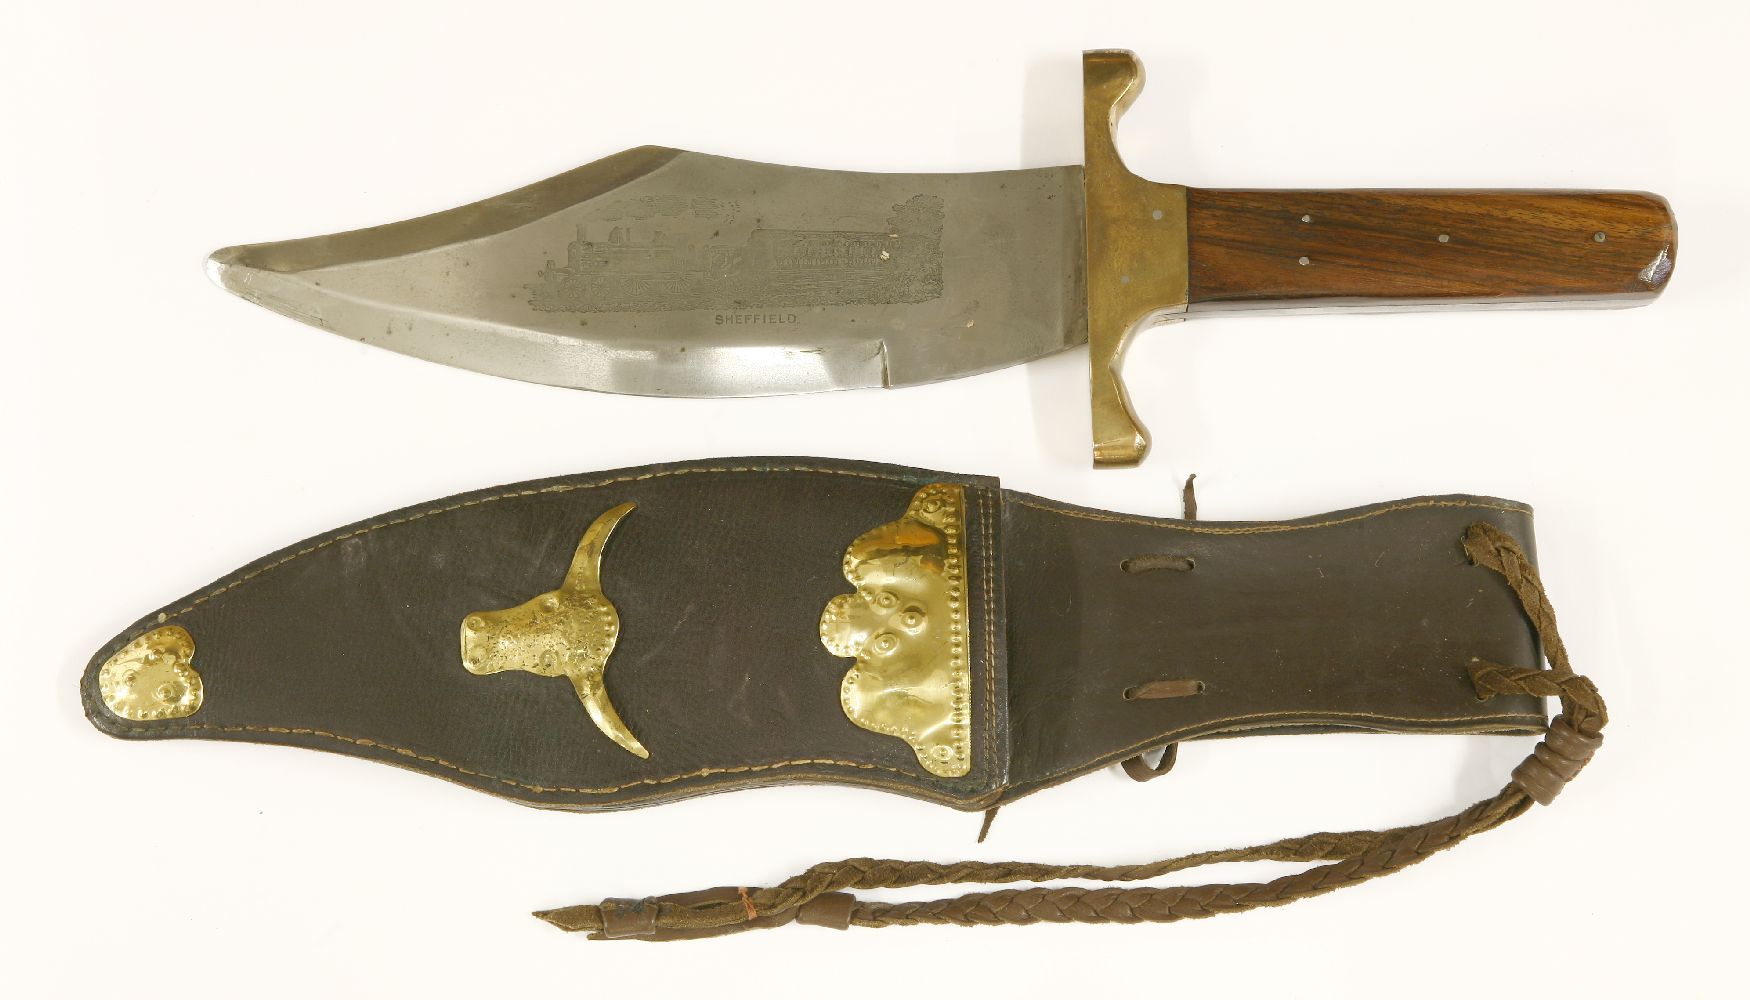 Two Bowie knives in leather scabbards,mid-20th century, one with walnut grip, the blade etched - Image 3 of 4